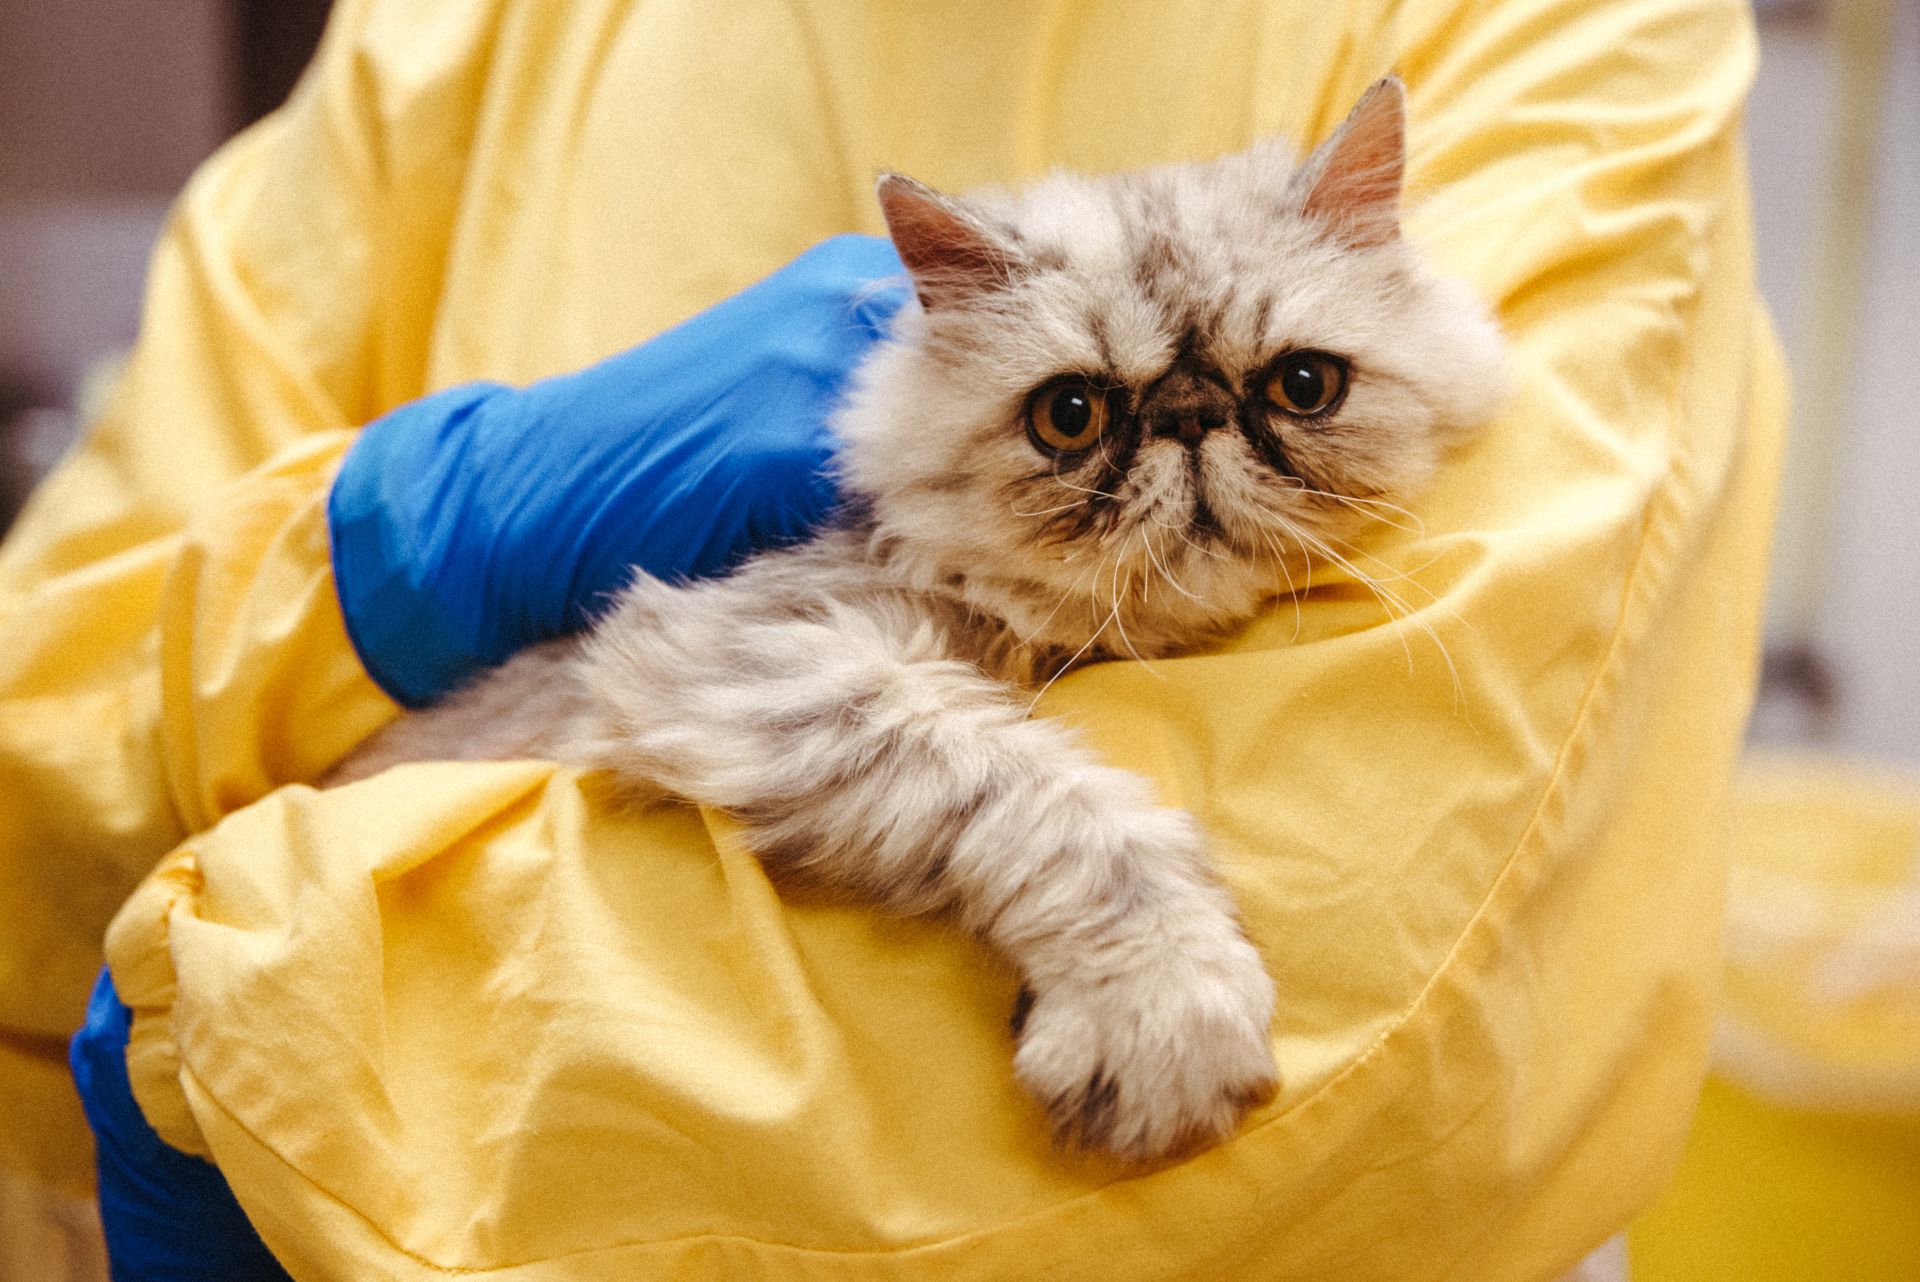 Squish faced kitty being held by a volunteer in a yellow scrub and blue gloves